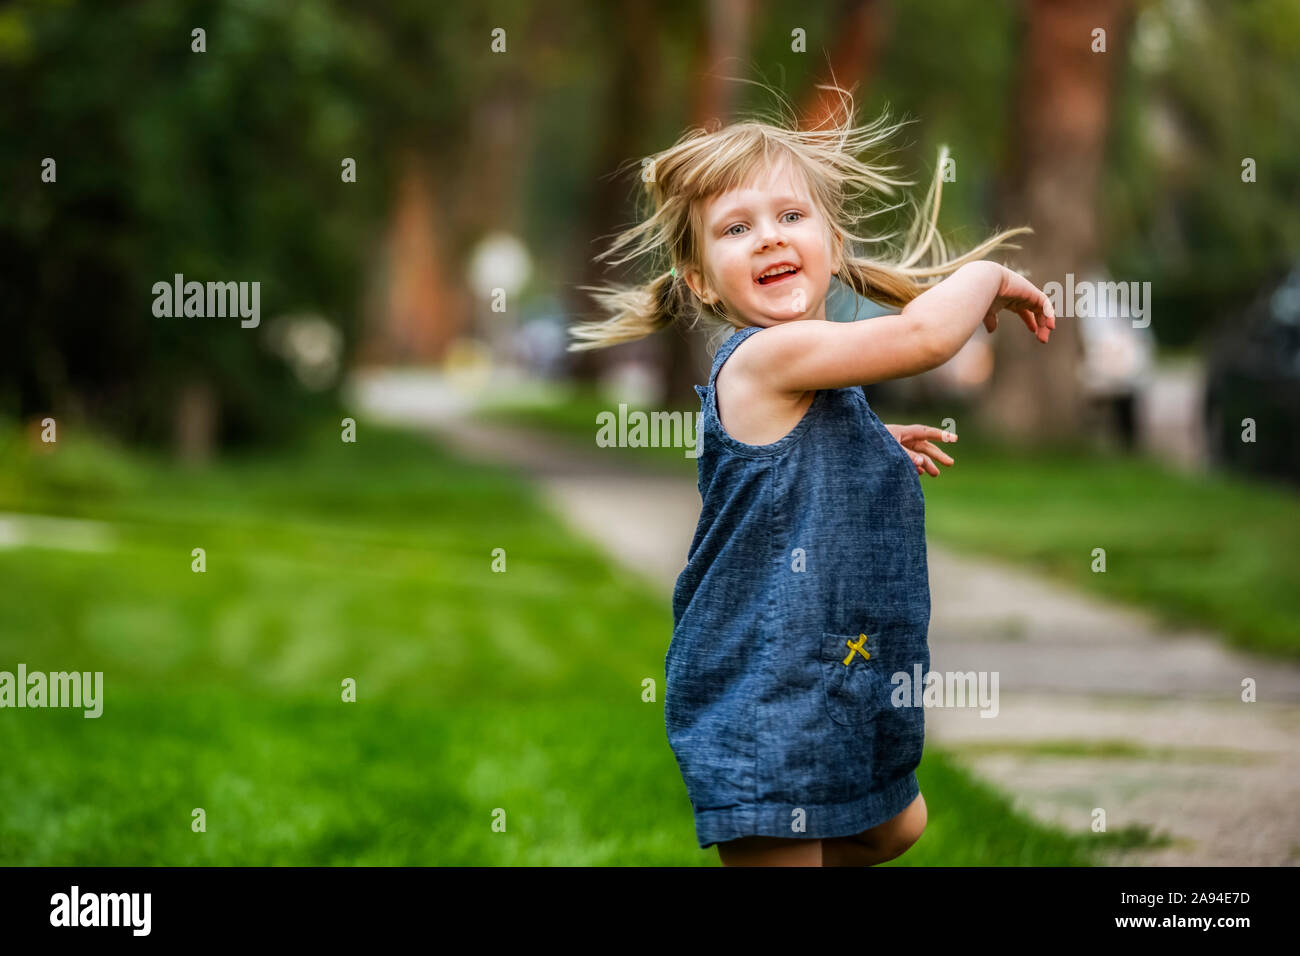 Young girl in pigtails moves during playtime in her neighbourhood; Edmonton, Alberta, Canada Stock Photo